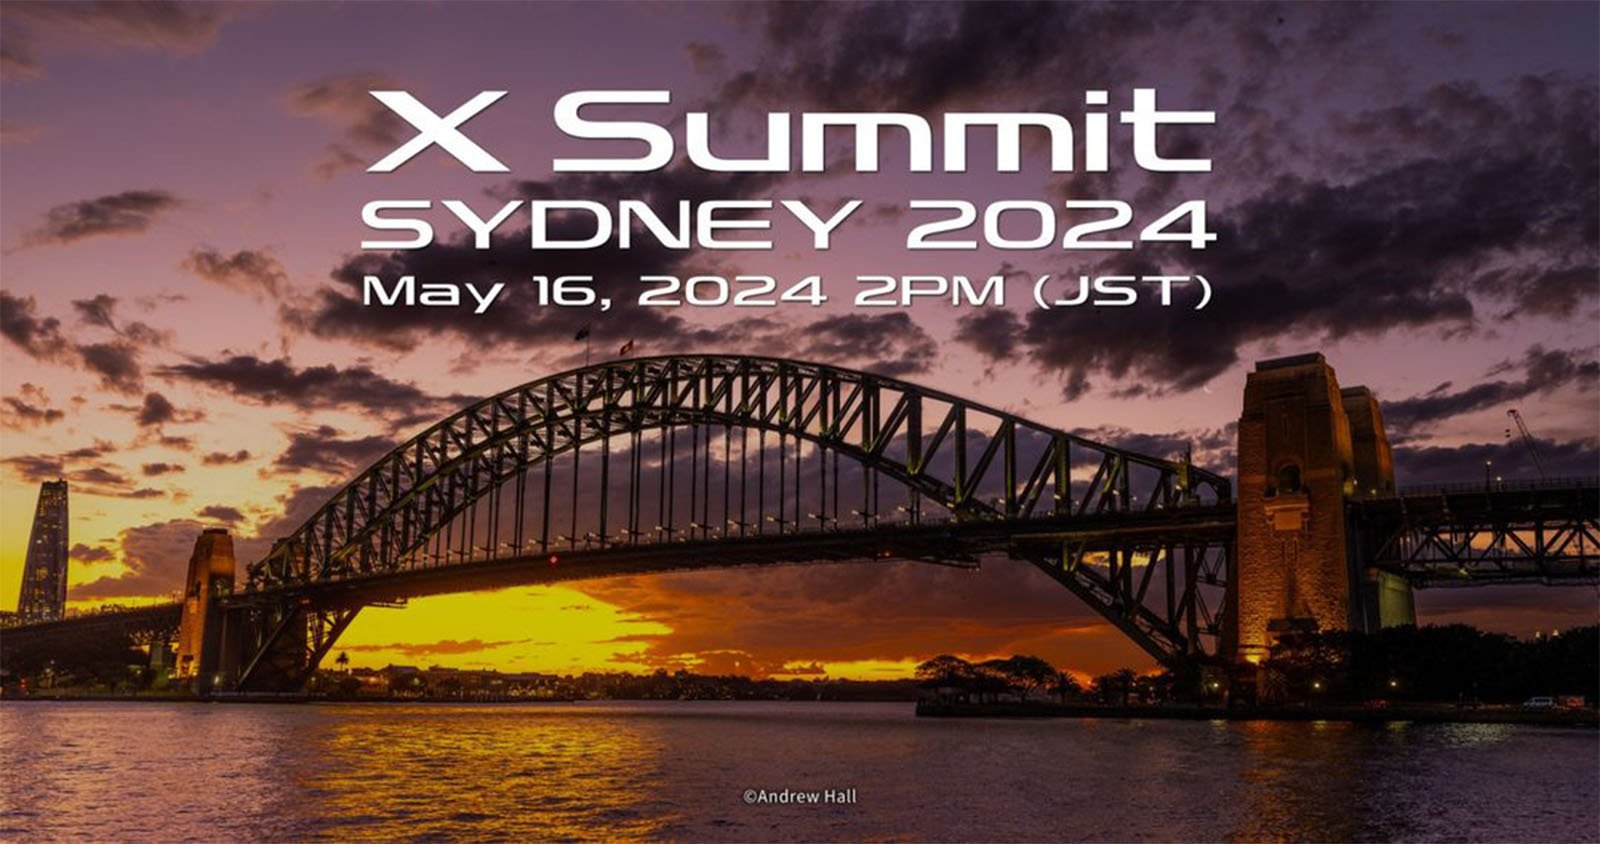 Promotional image for x summit sydney 2024, featuring sydney harbour bridge at sunset with vibrant colors in the sky. event details and date are prominently displayed.